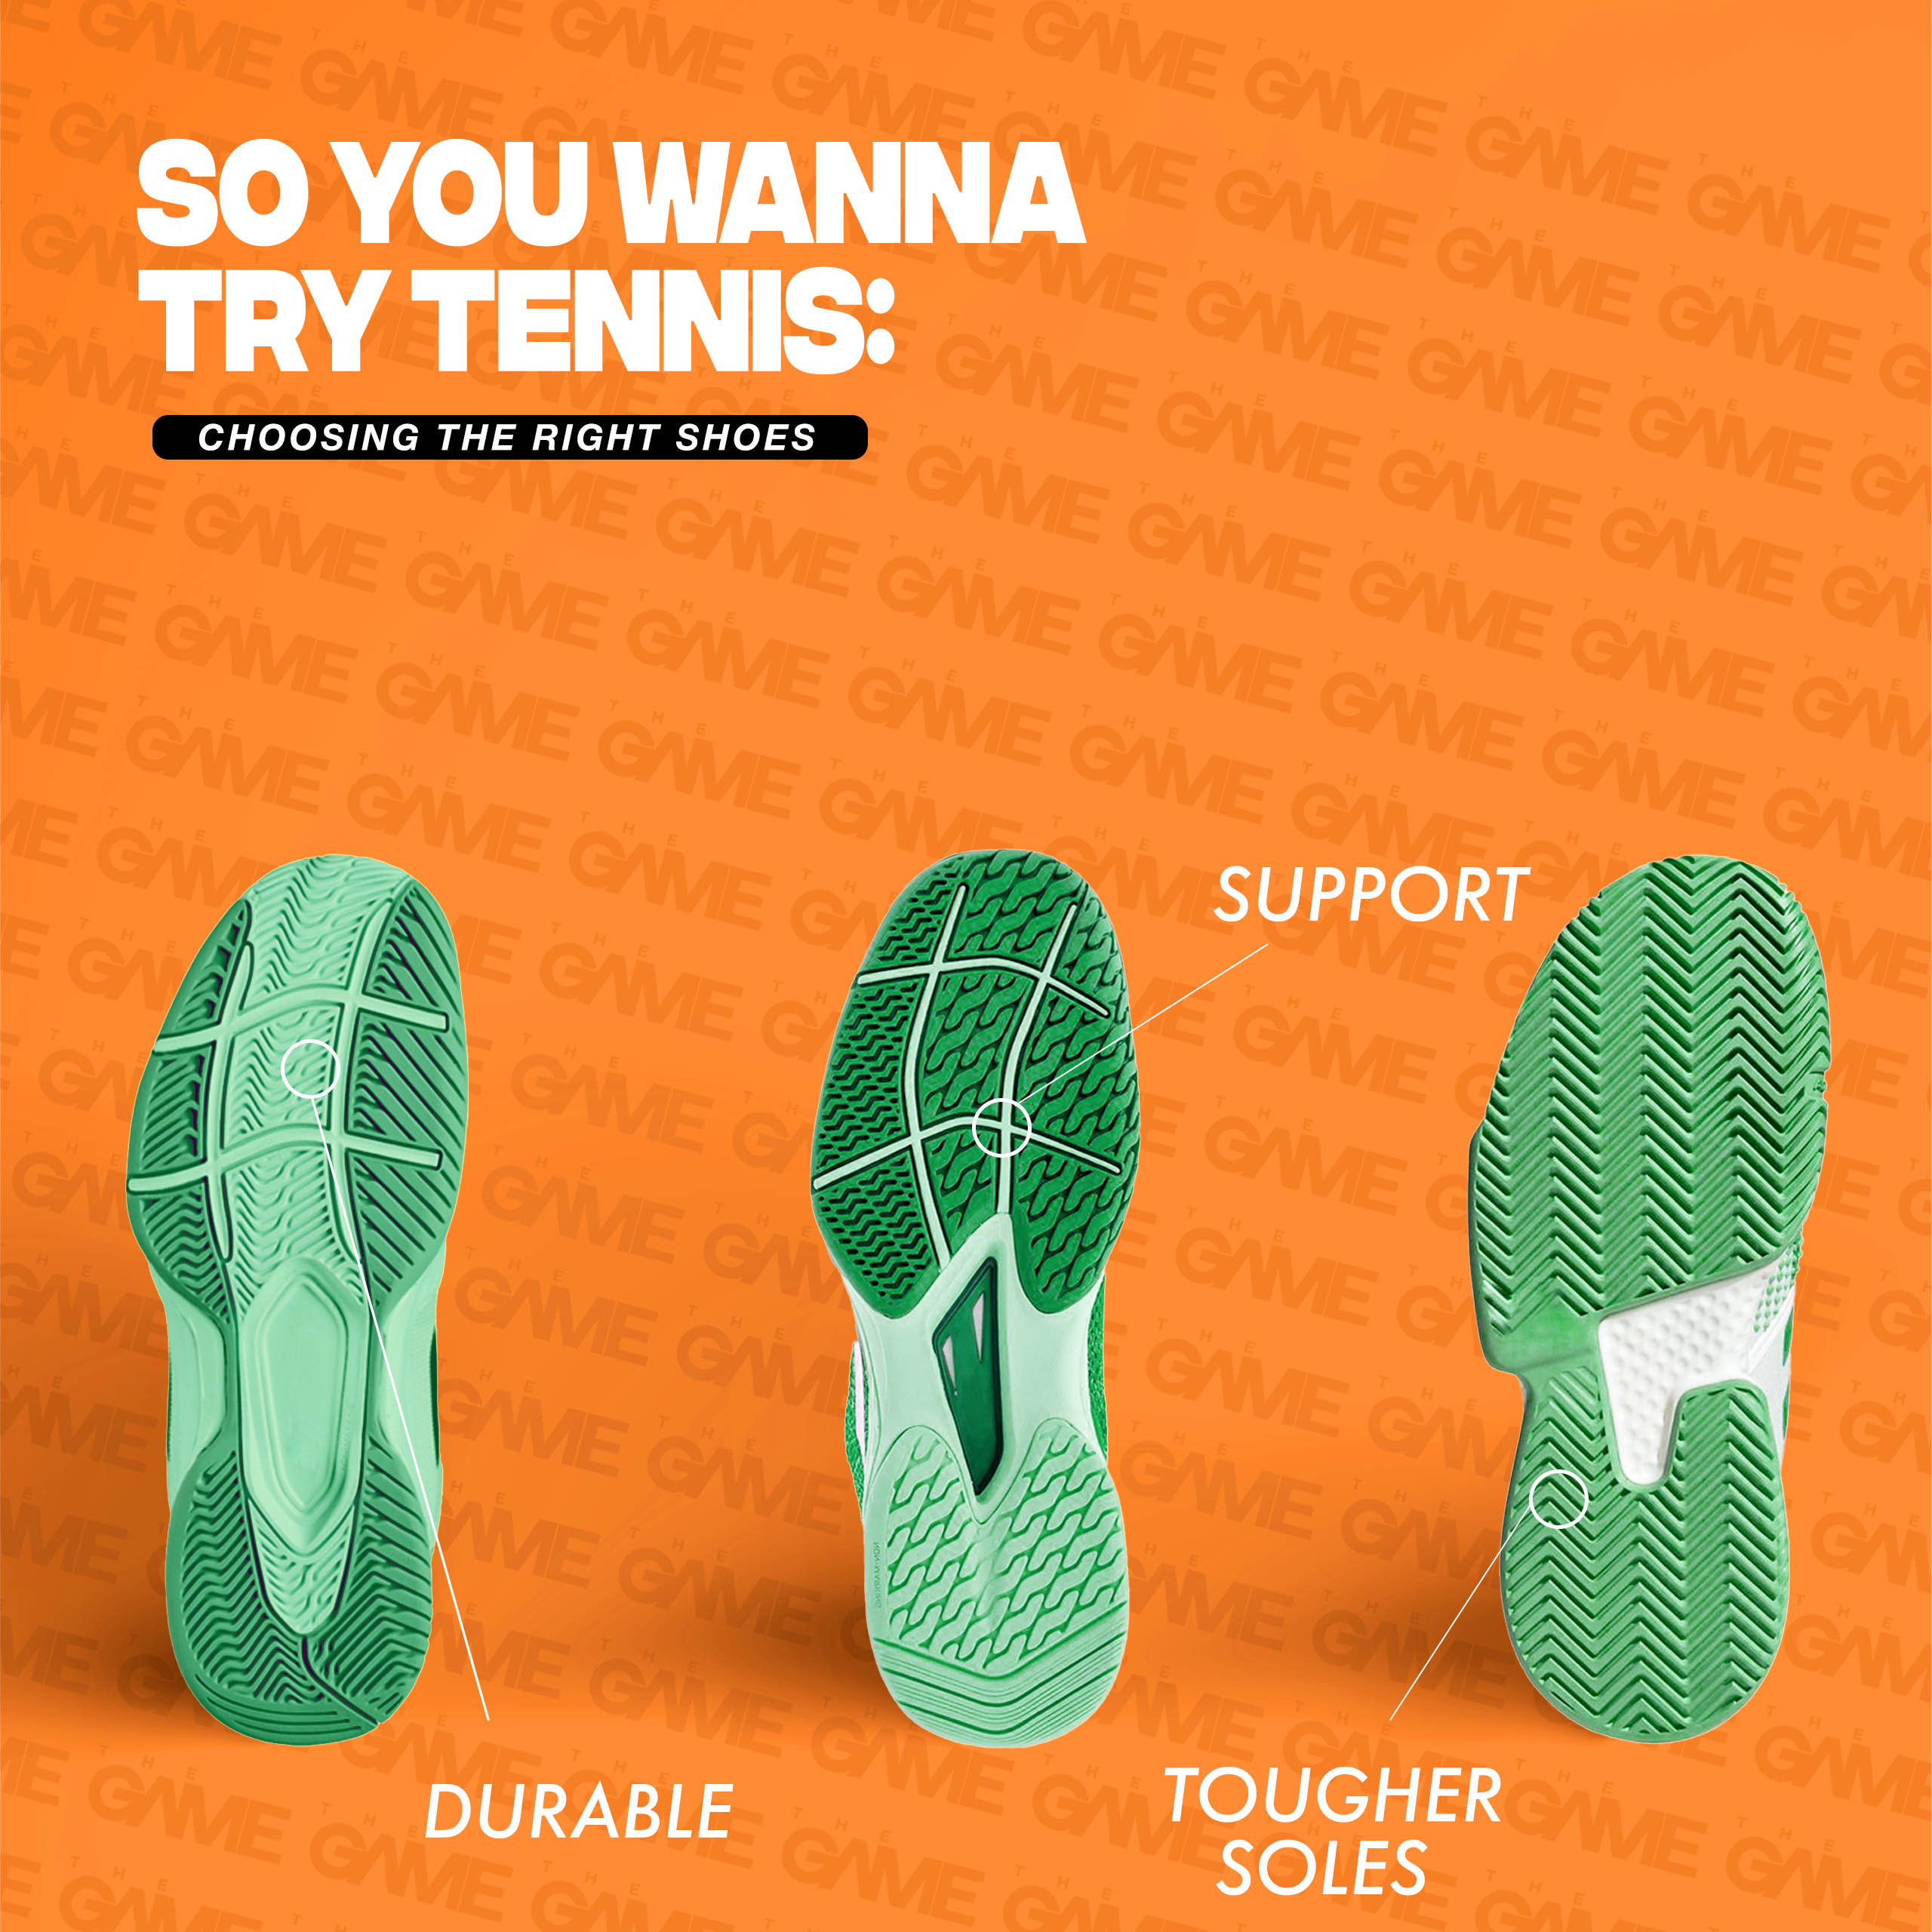 Tennis shoes are more durable, provide more support, and have tougher soles. 